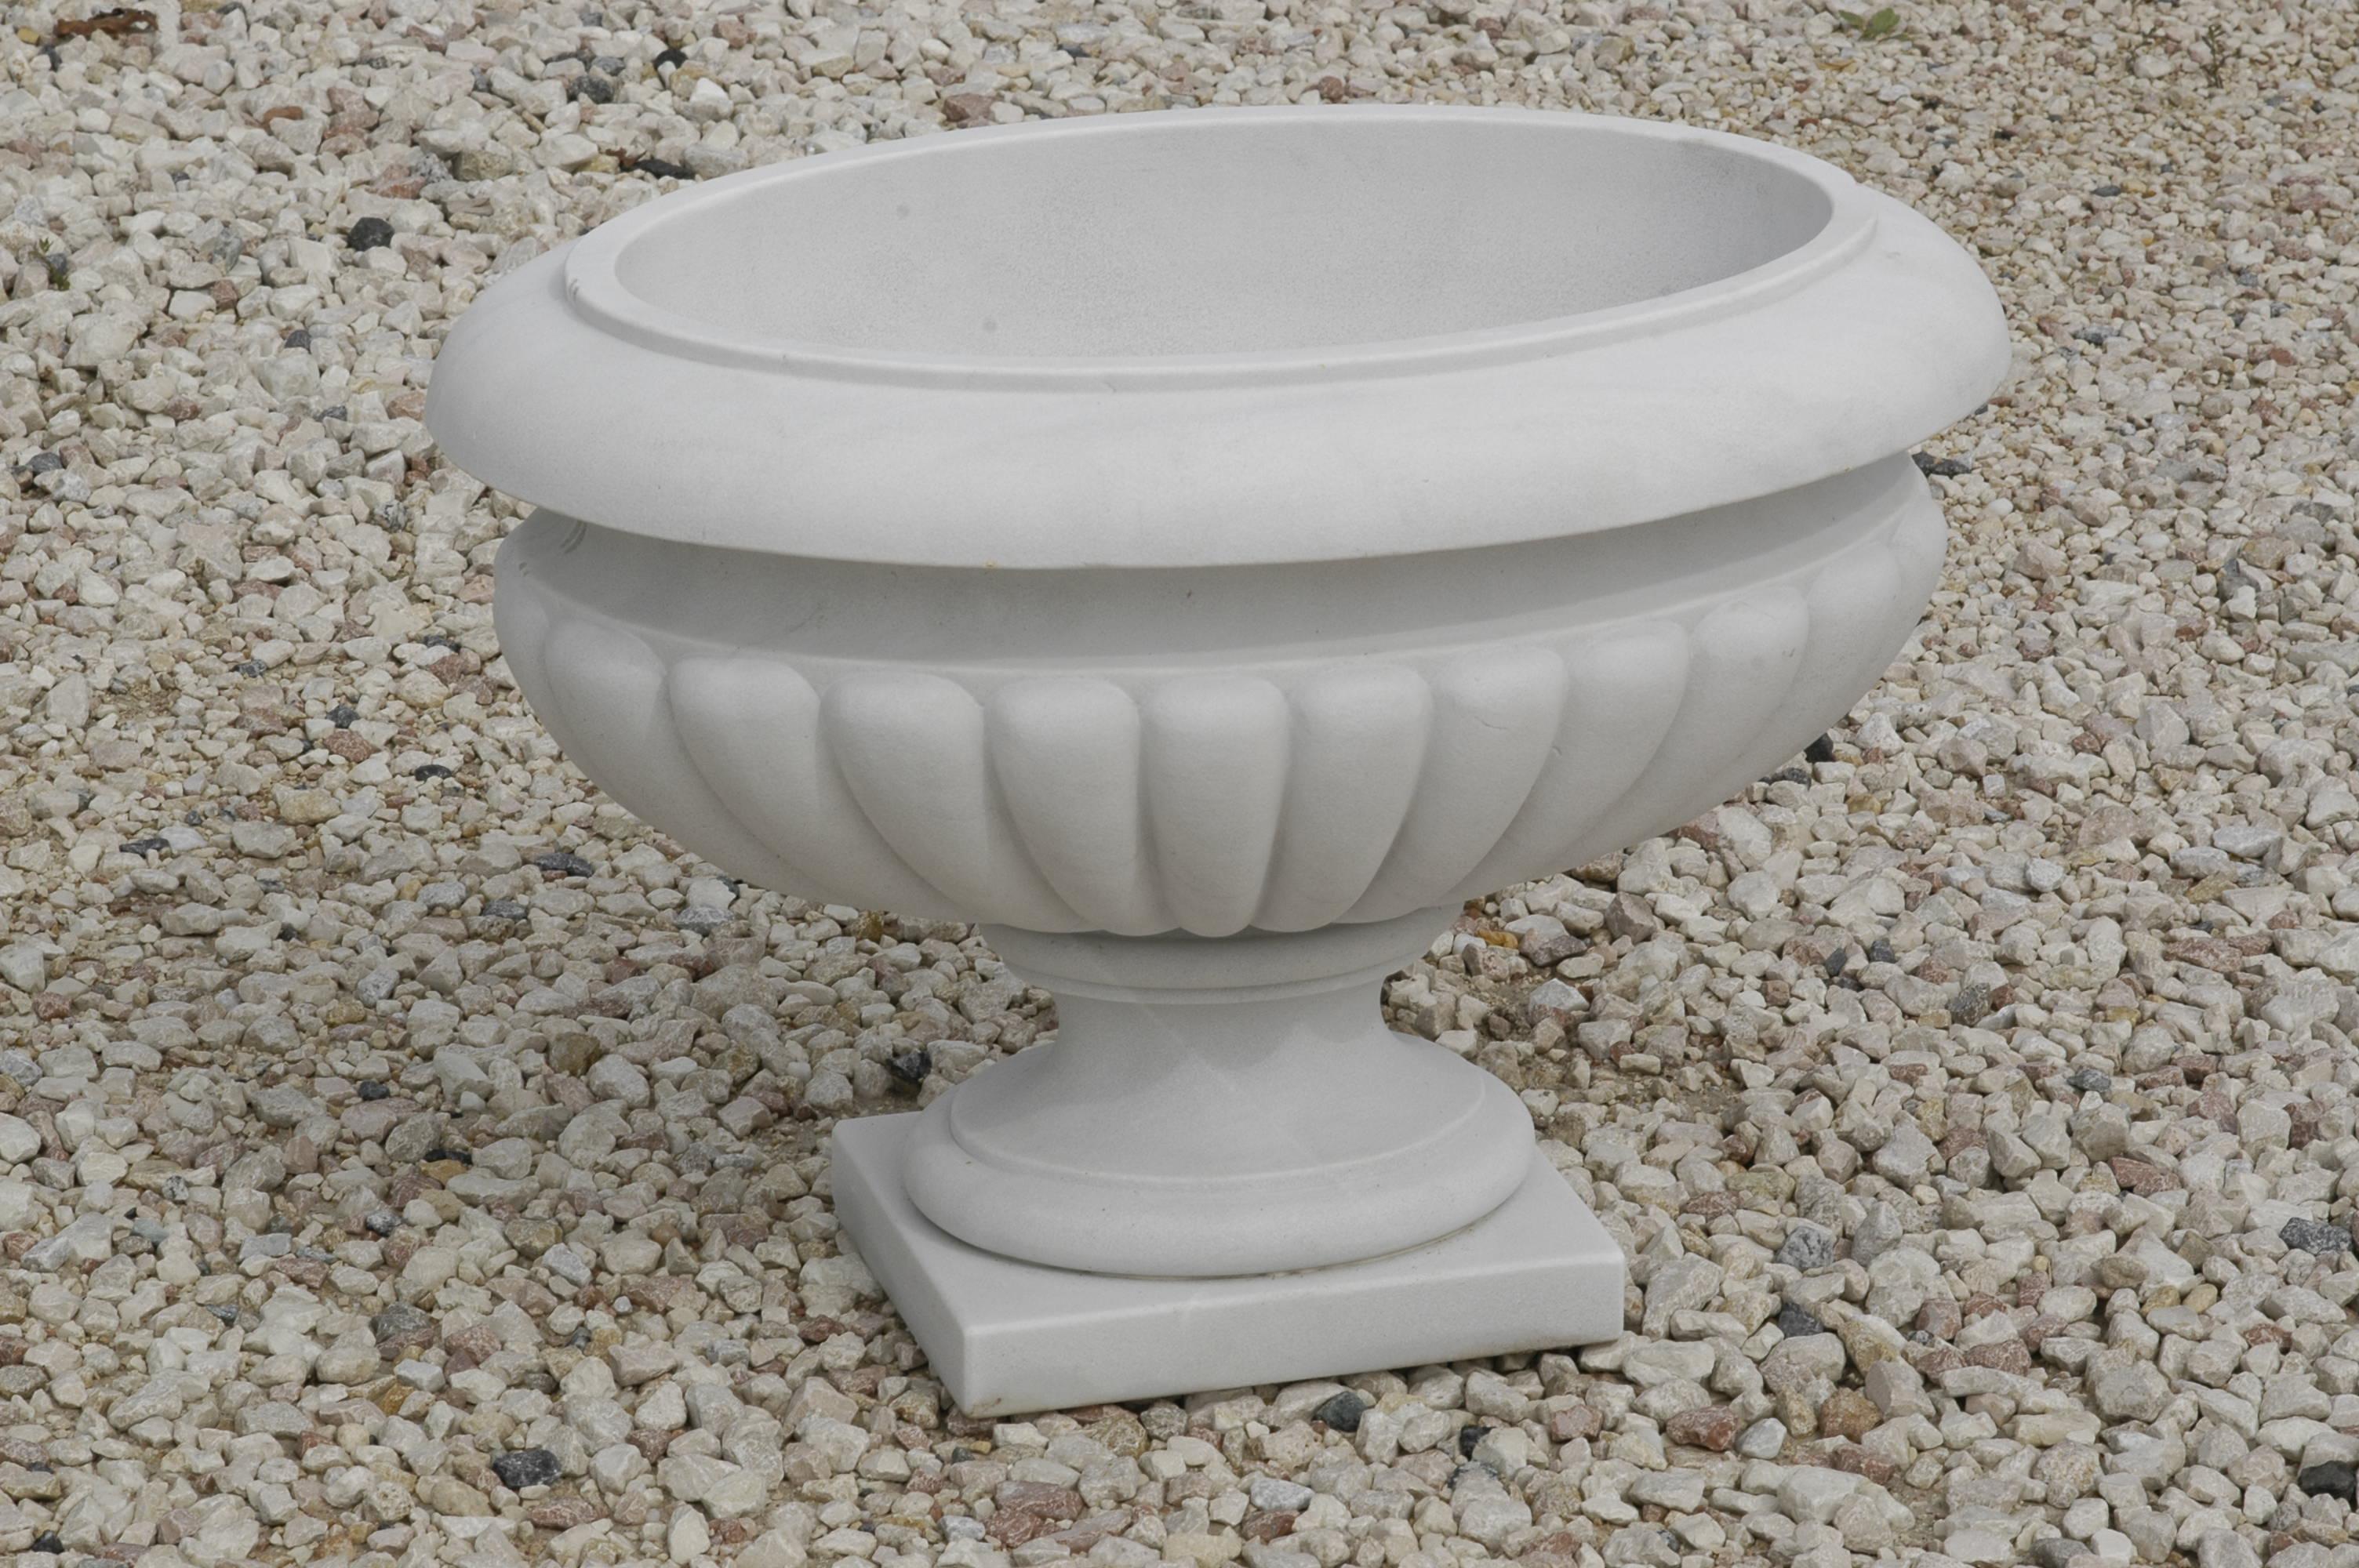 Multipurpose Hydria vase in crema marfil marble. Perfect for garden or home decor.